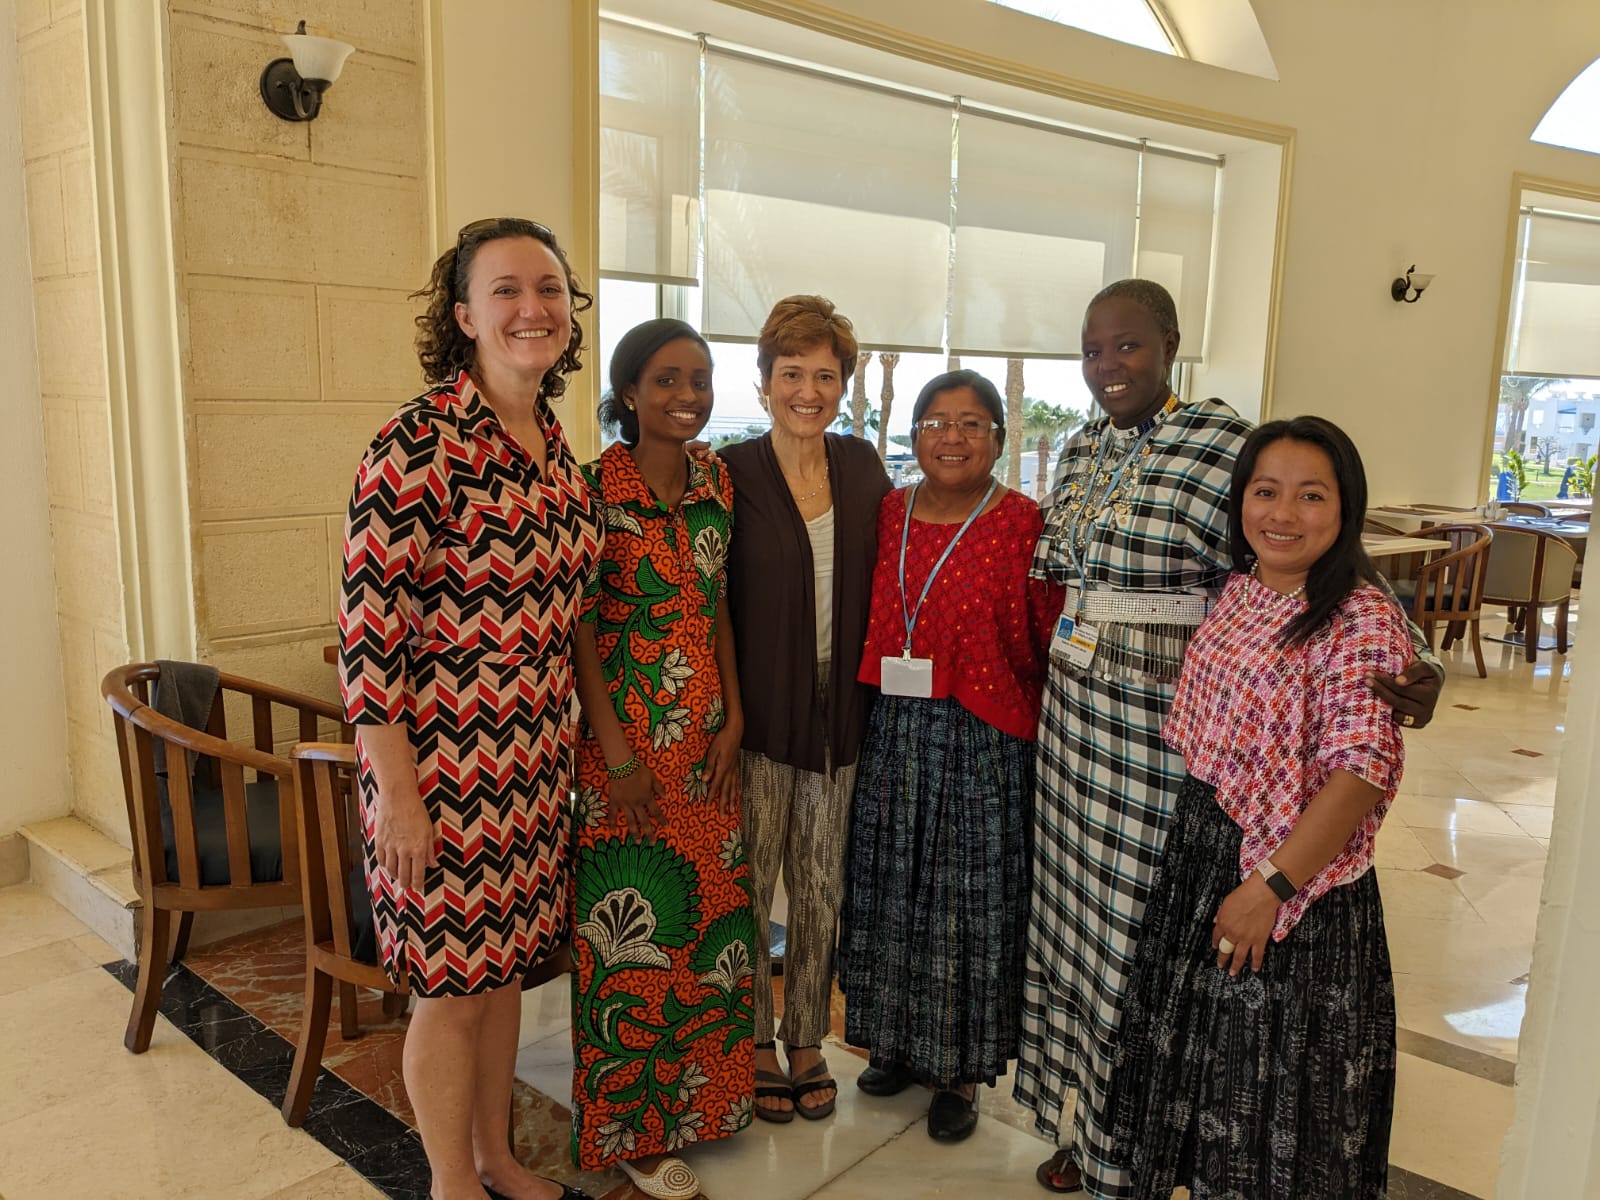 During COP 27, Neema, Sara, Aisatou, and Lola meet with Acting Assistant Secretary for the Bureau on Resilience and Food Security Dina Esposito and Senior Climate Change Advisor Ann Vaughan from USAID to exchange perspectives.